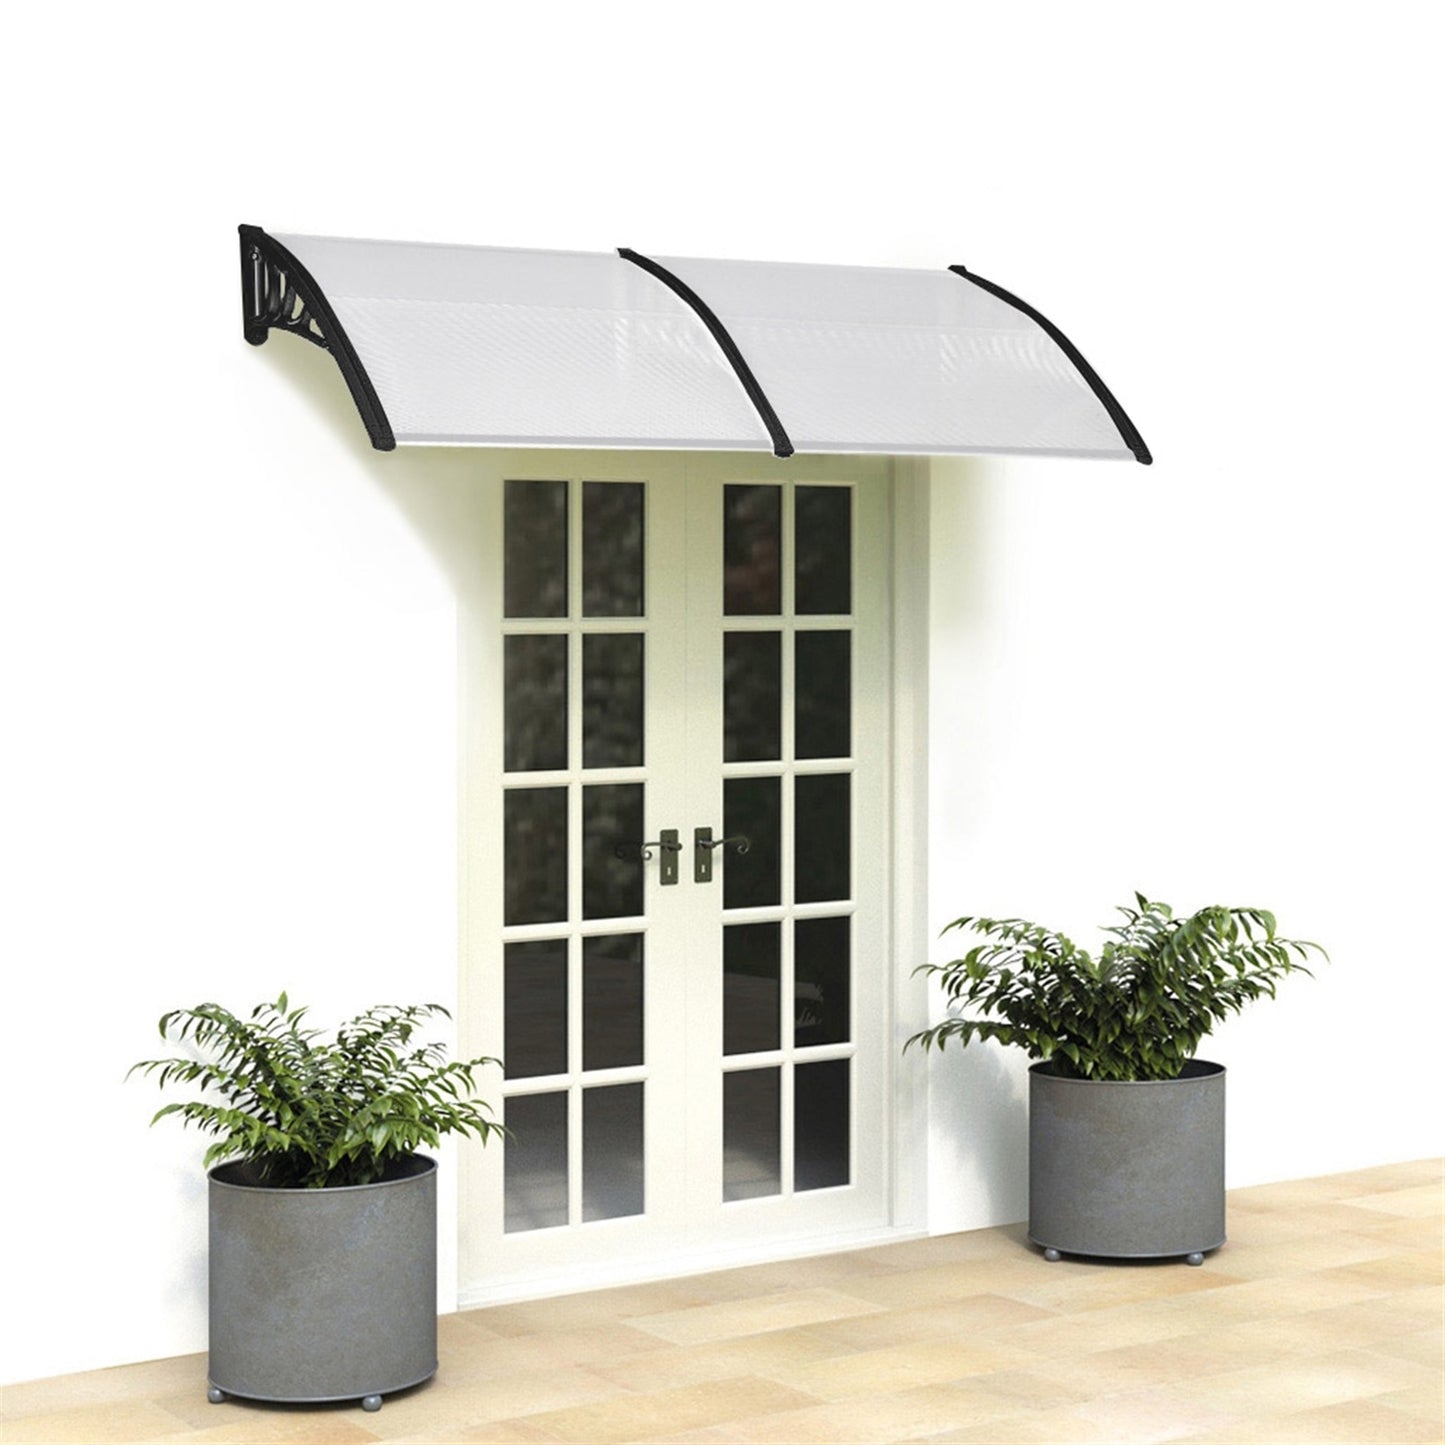 80"x 40" Outdoor Front Door Window Awning Patio Canopy Rain Cover UV Protected Eaves RT